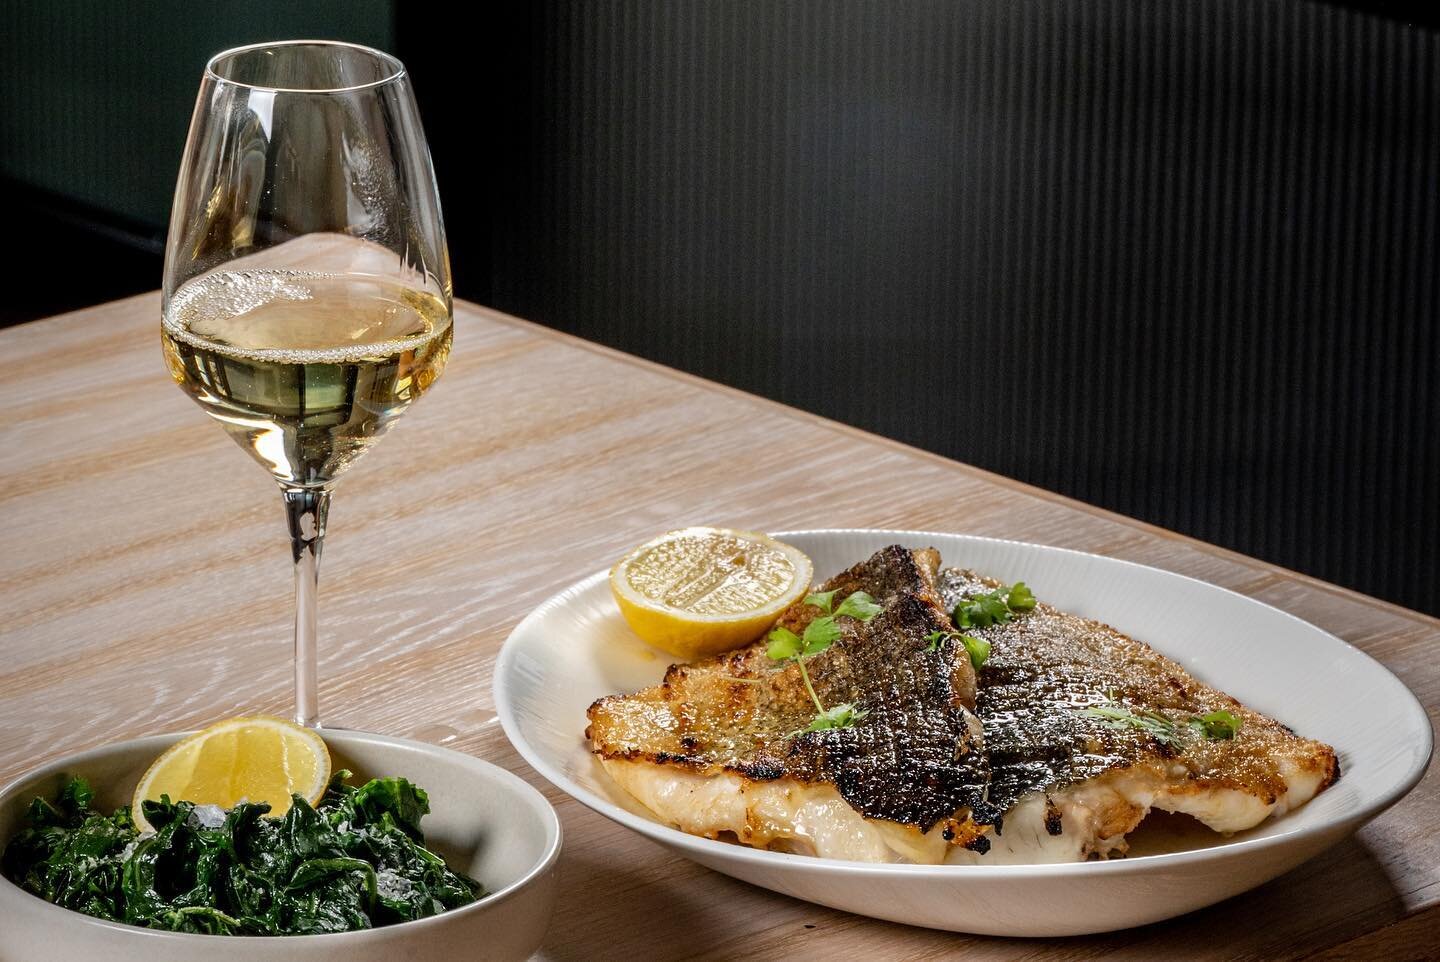 Crispy skin Murray Cod fillet, cooked to perfection on sizzling hot coals 🔥 Perfect for sharing with loved ones! Pair with our famous seasonal greens &lsquo;horta&rsquo; and truffle fries.

Bookings can be made via our link on bio. 
#sofiaonclevelan